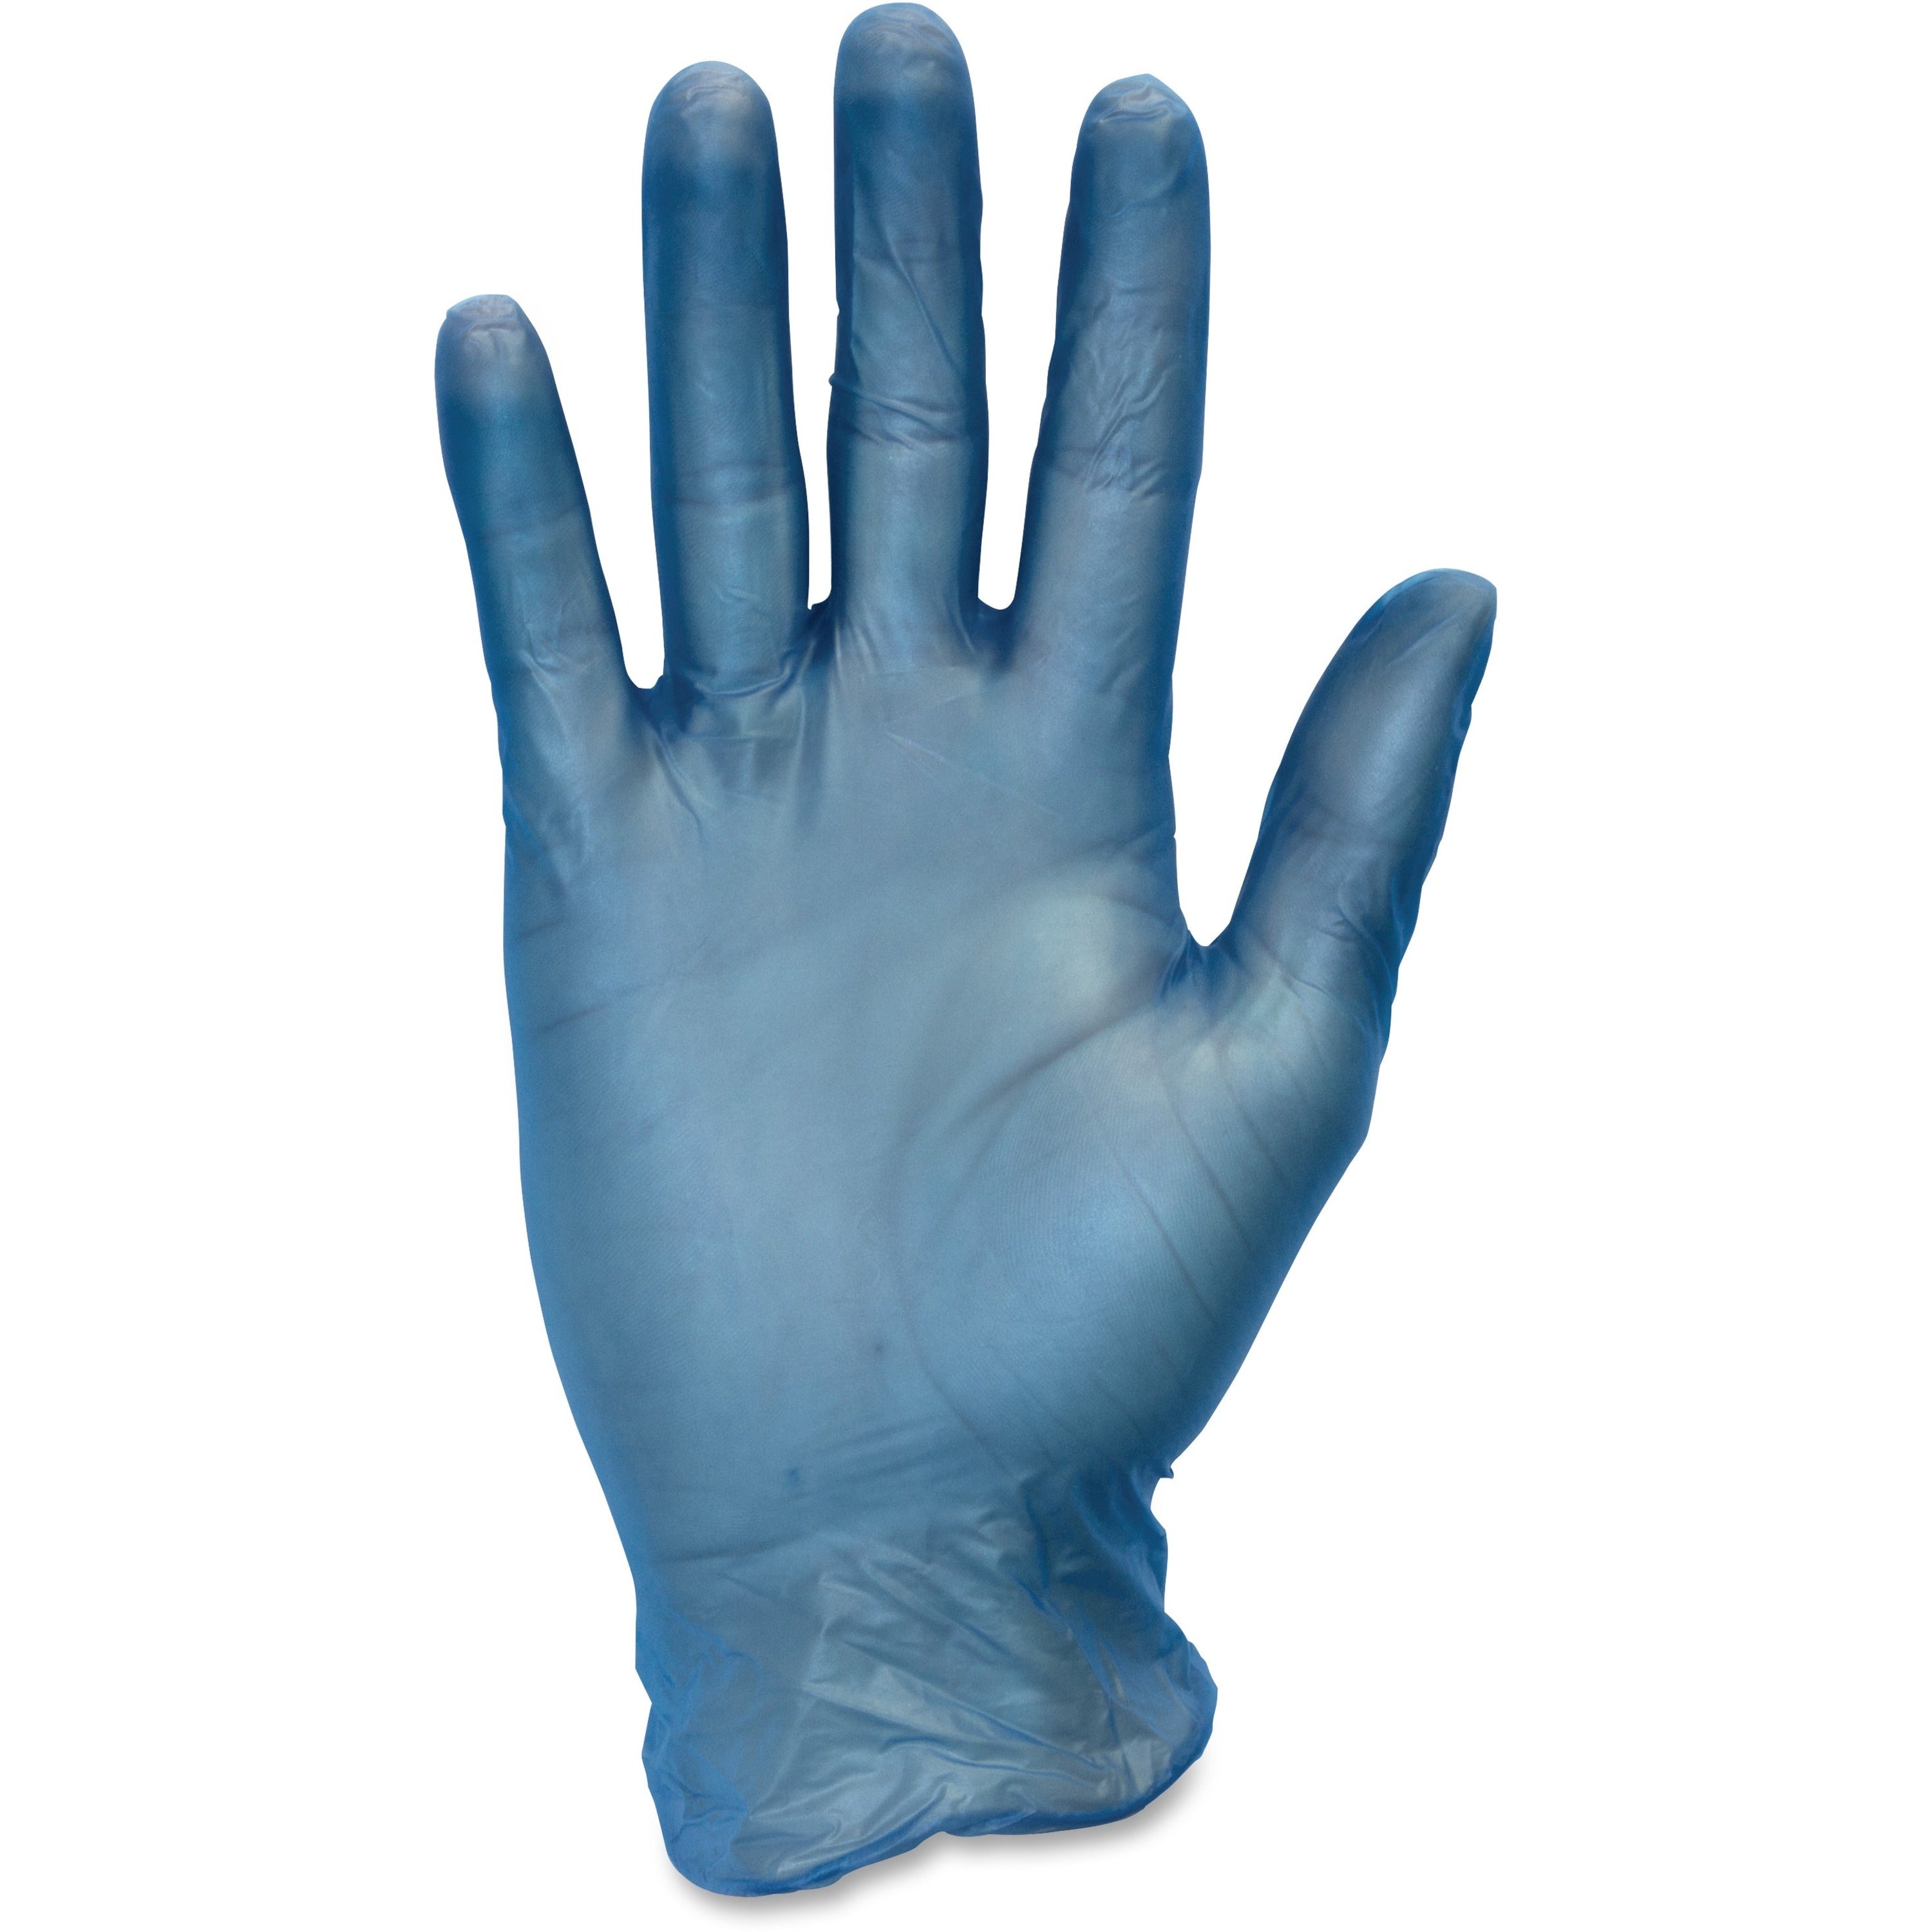 safety-zone-general-purpose-powder-free-vinyl-gloves-small-size-for-right-left-hand-blue-latex-free-dehp-free-dinp-free-pfas-free-for-janitorial-use-cosmetics-painting-cleaning-general-purpose-pet-care-100-box-3-mil-thickness_szngvp9sm1bl - 1